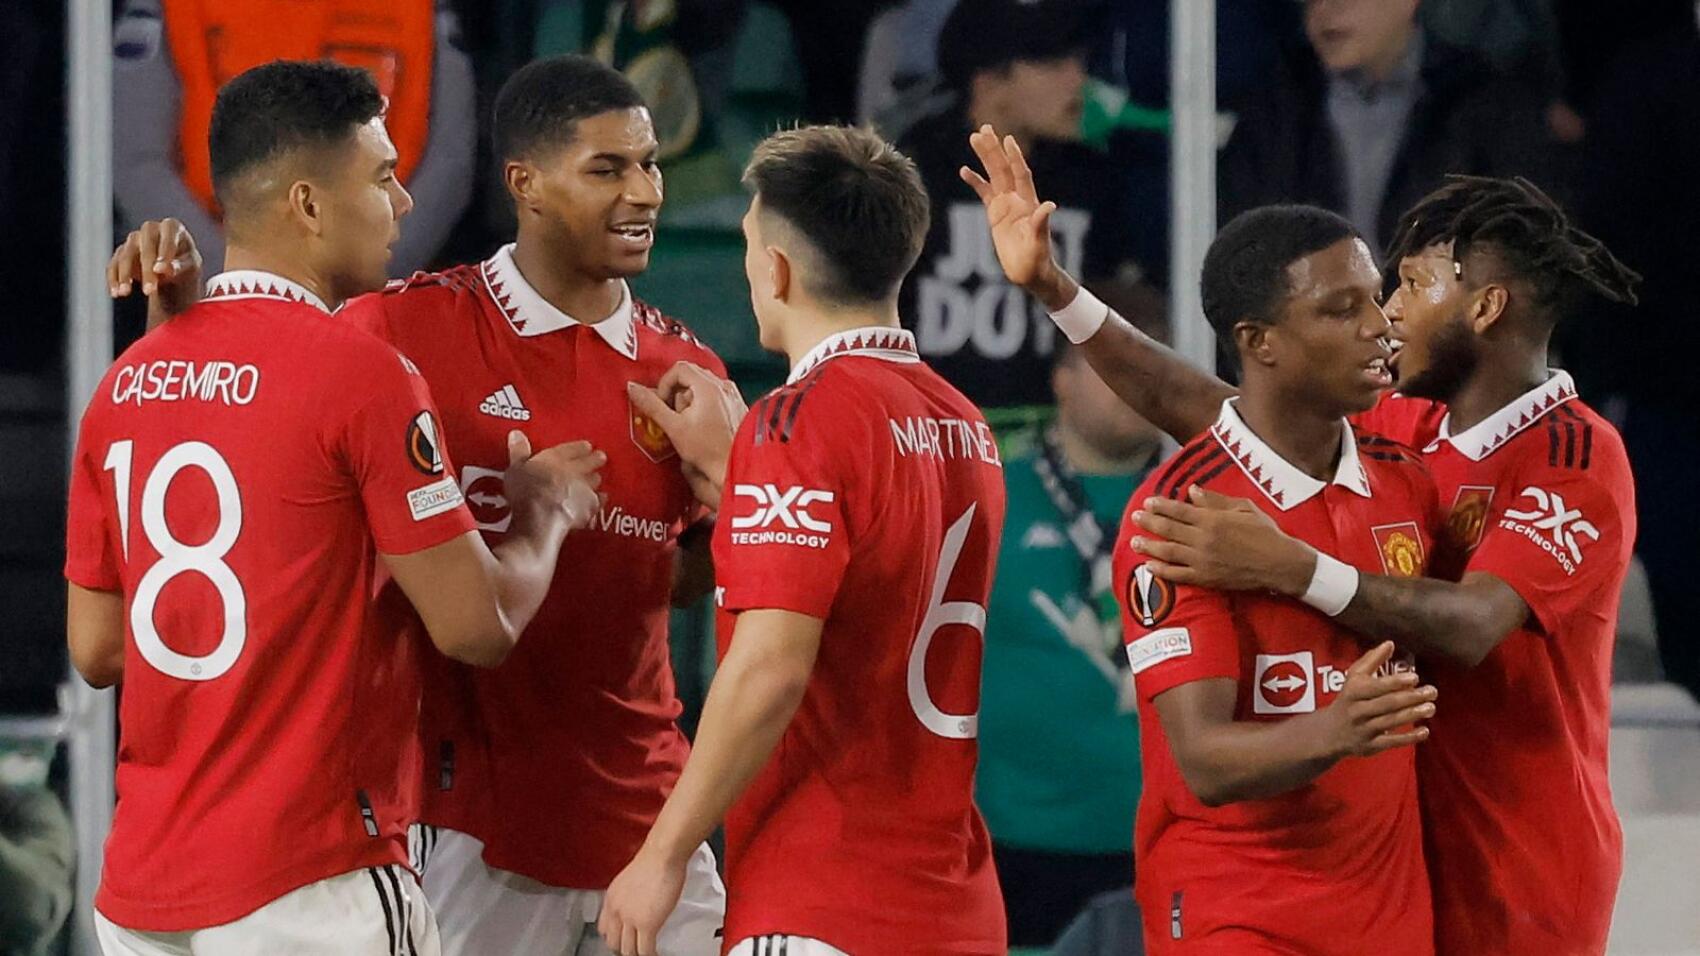 Manchester United's Marcus Rashford celebrates with teammates after scoring the only goal of the game during their Europa League clash against Real Betis at the Estadio Benito Villamarin in Seville on Thursday